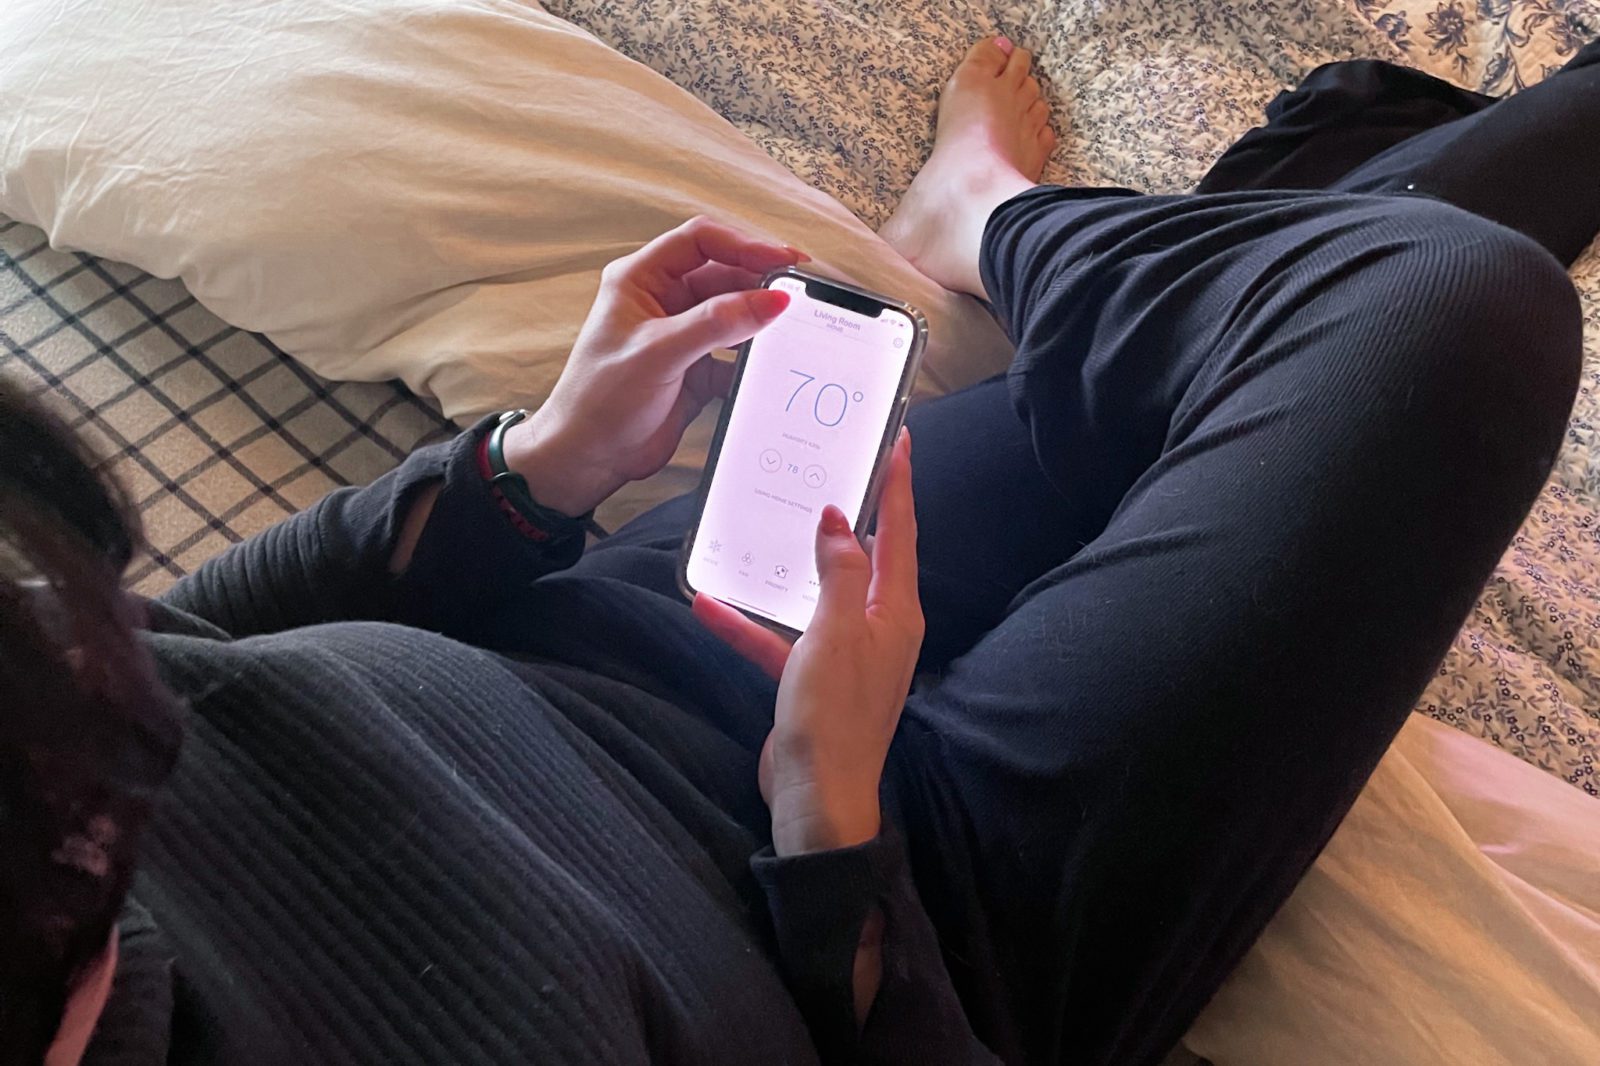 Woman sitting on a couch using an app on her phone.